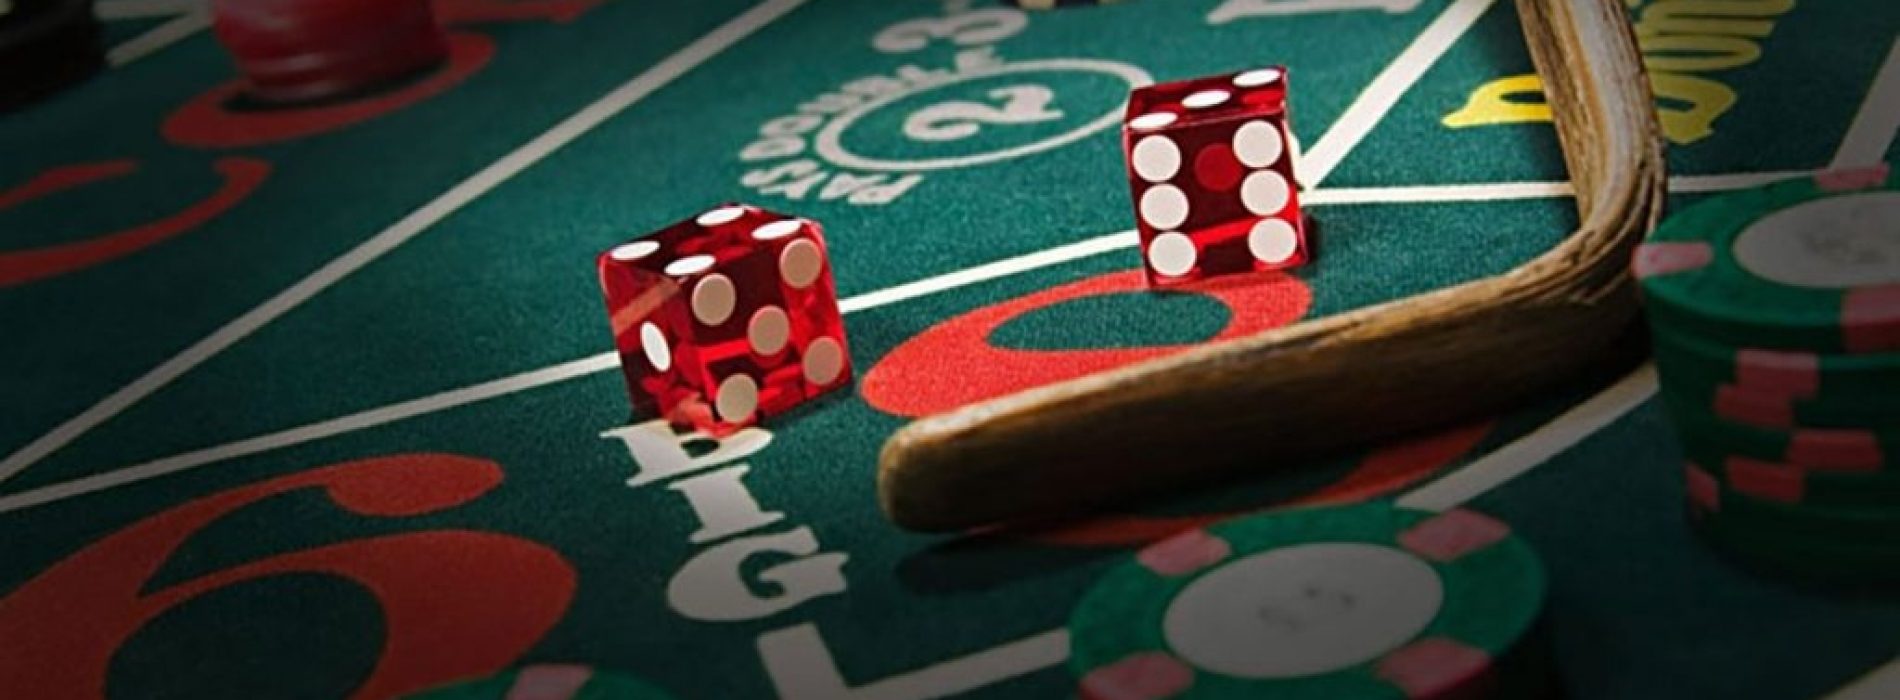 Defeating the Online Casinos at Their Own Game